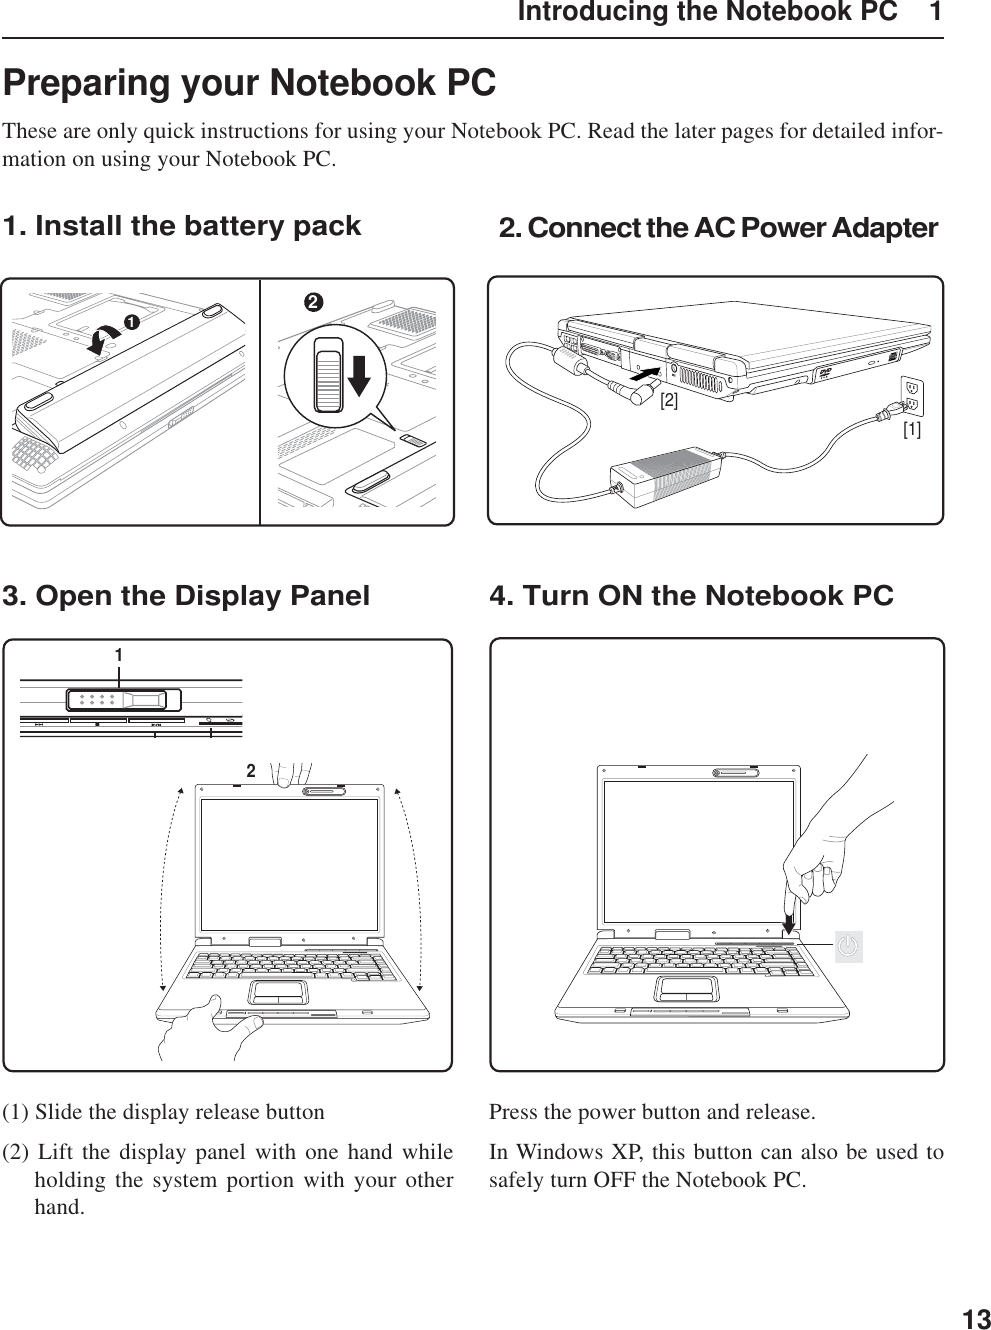 13Introducing the Notebook PC    1Preparing your Notebook PCThese are only quick instructions for using your Notebook PC. Read the later pages for detailed infor-mation on using your Notebook PC.1. Install the battery pack3. Open the Display Panel 4. Turn ON the Notebook PC2. Connect the AC Power AdapterPress the power button and release.In Windows XP, this button can also be used tosafely turn OFF the Notebook PC.(1) Slide the display release button(2) Lift the display panel with one hand whileholding the system portion with your otherhand.[1][2]1221